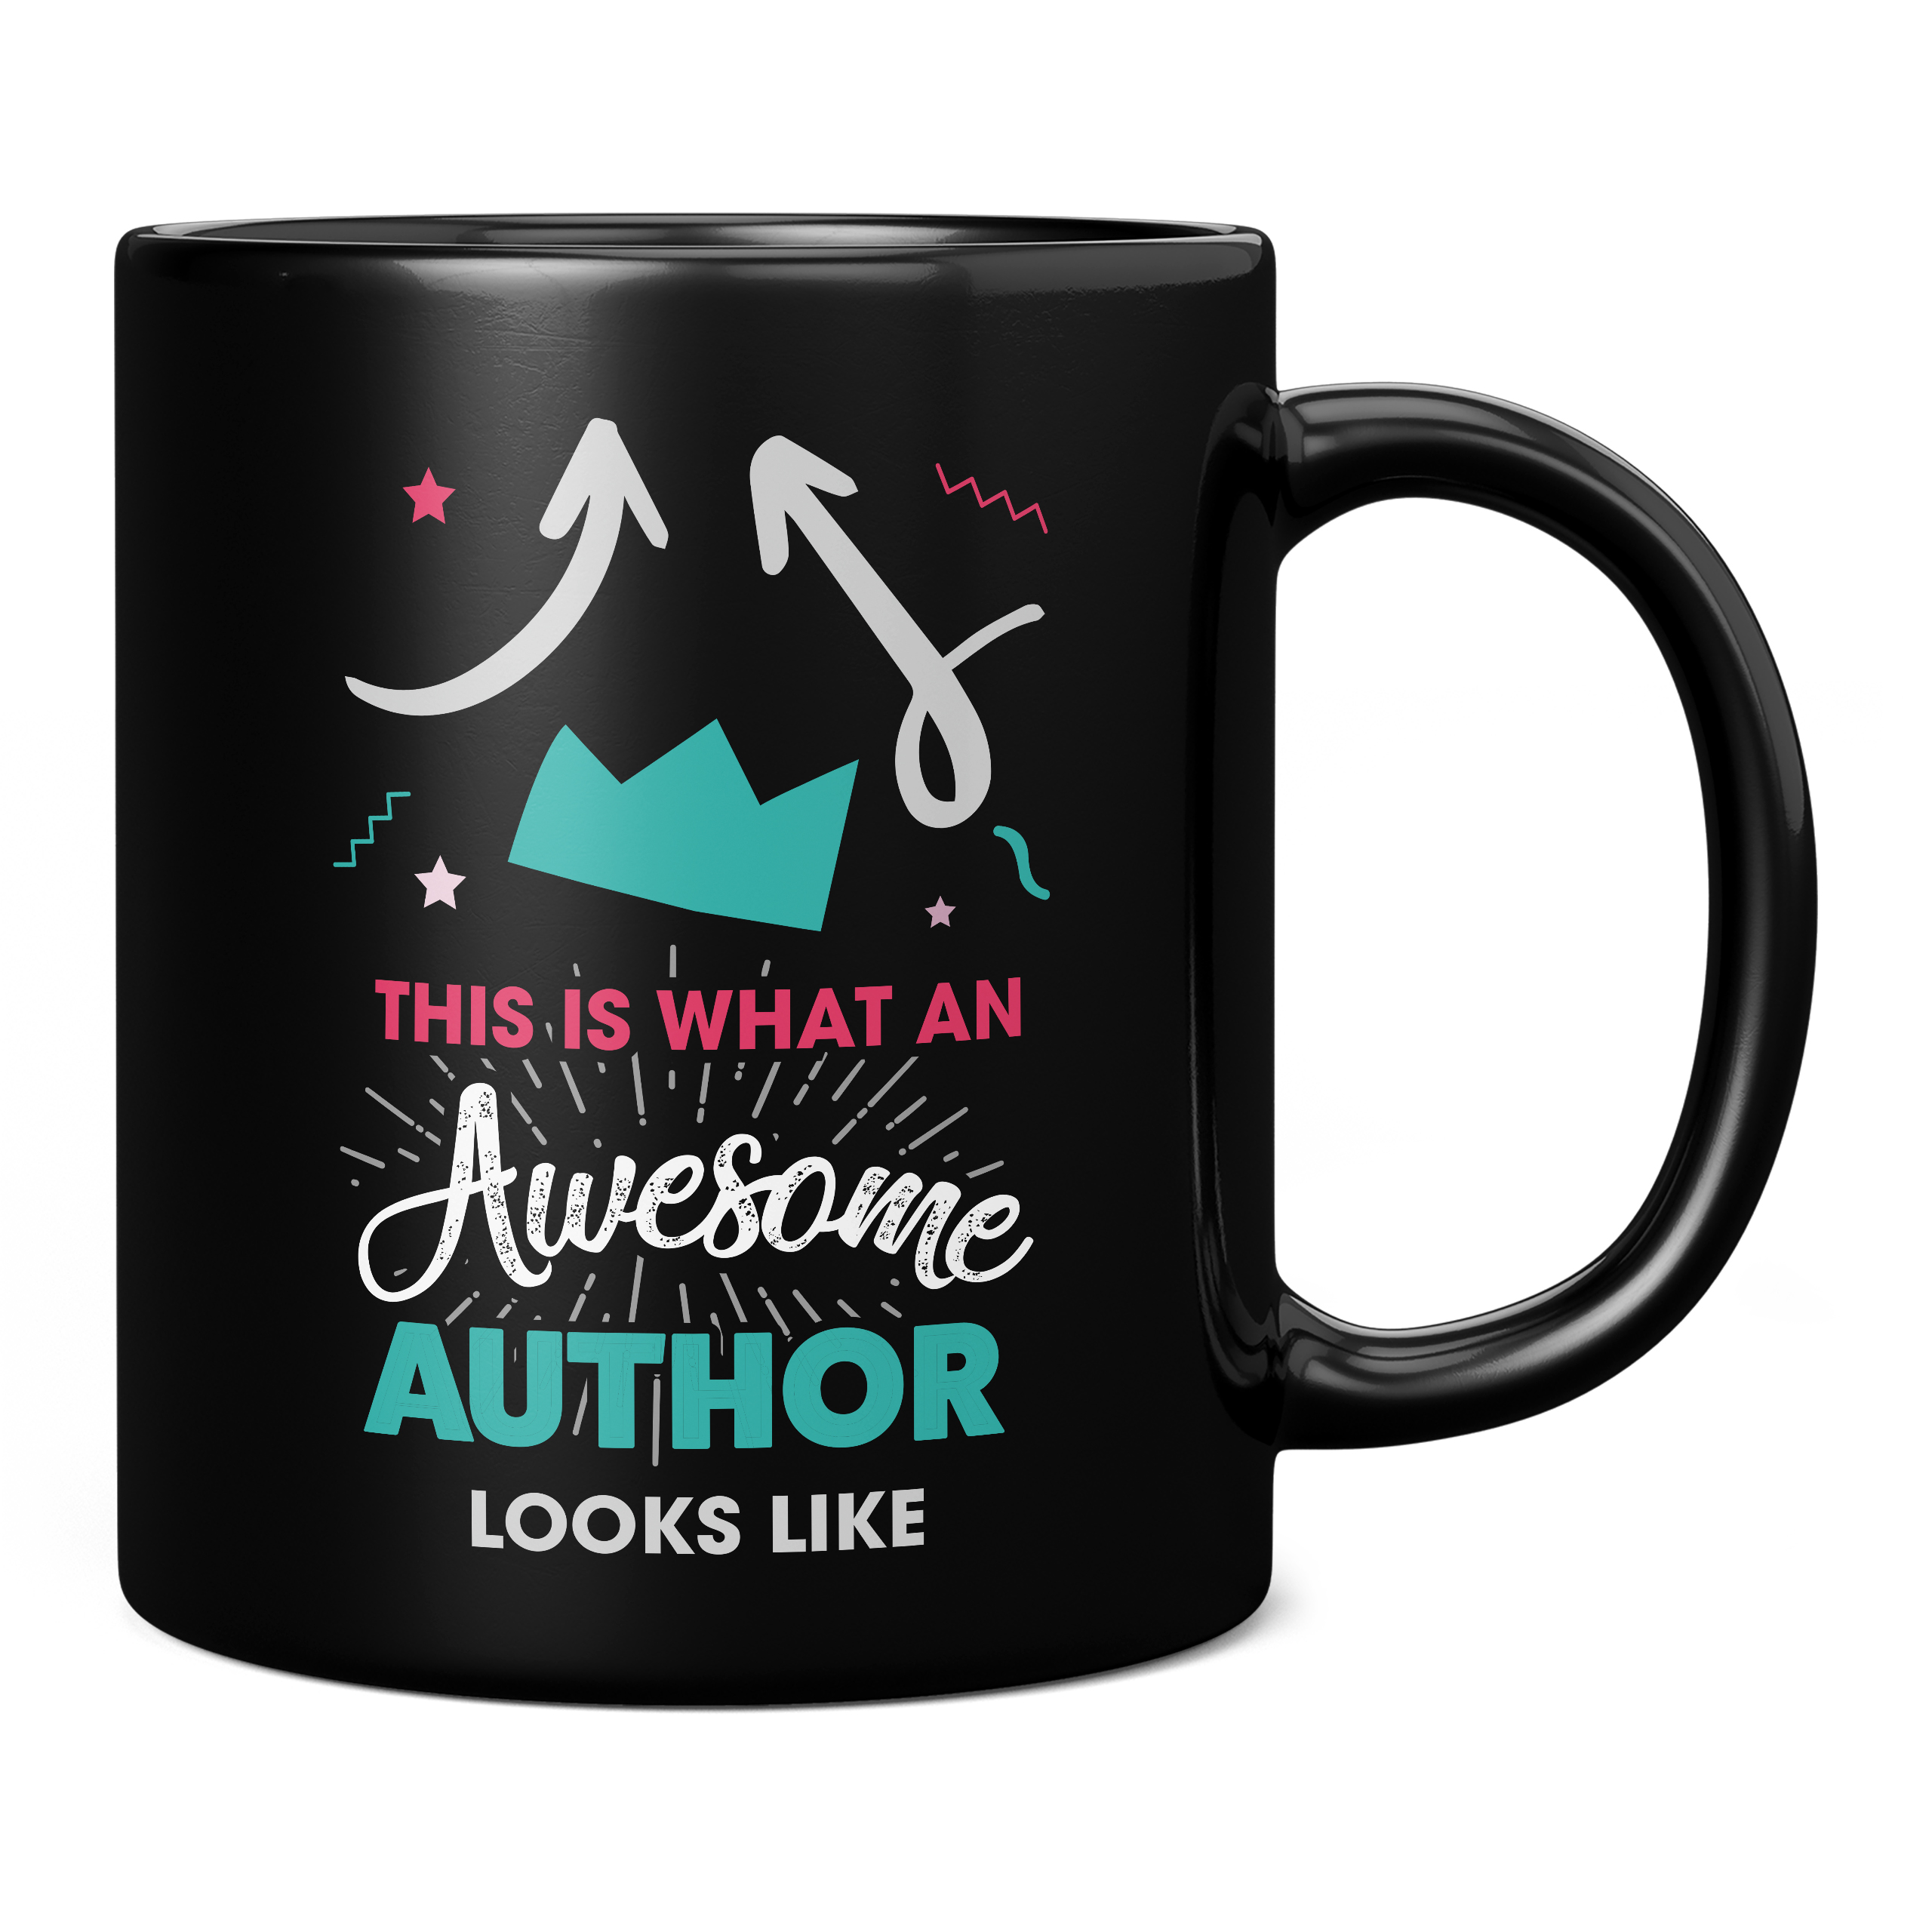 THIS IS WHAT AN AWESOME AUTHOR LOOKS LIKE 11OZ NOVELTY MUG